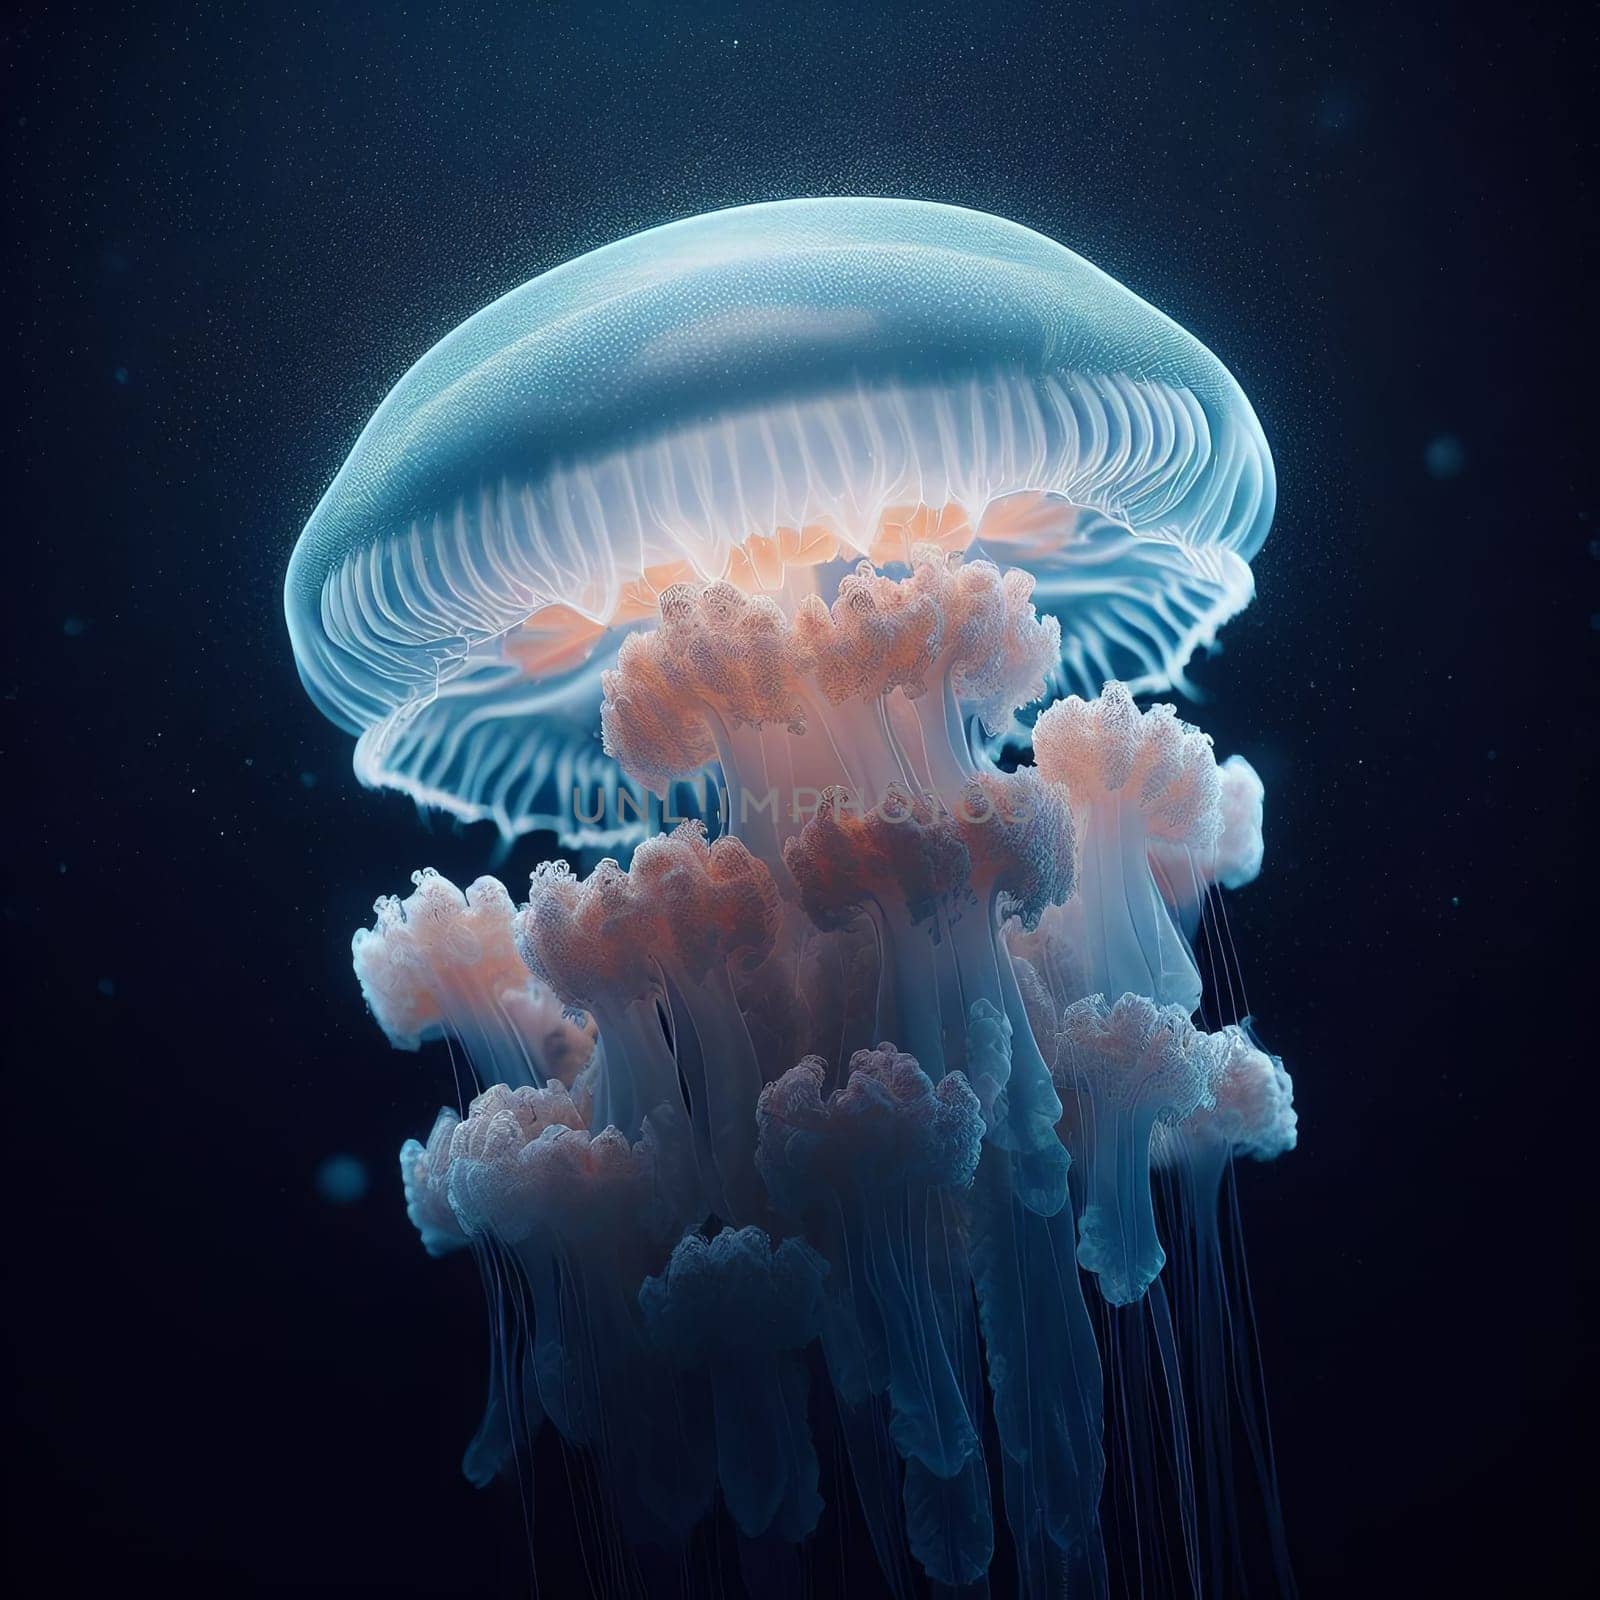 Luminescent jellyfish floats gracefully underwater, its tentacles and bell glowing against the dark ocean backdrop